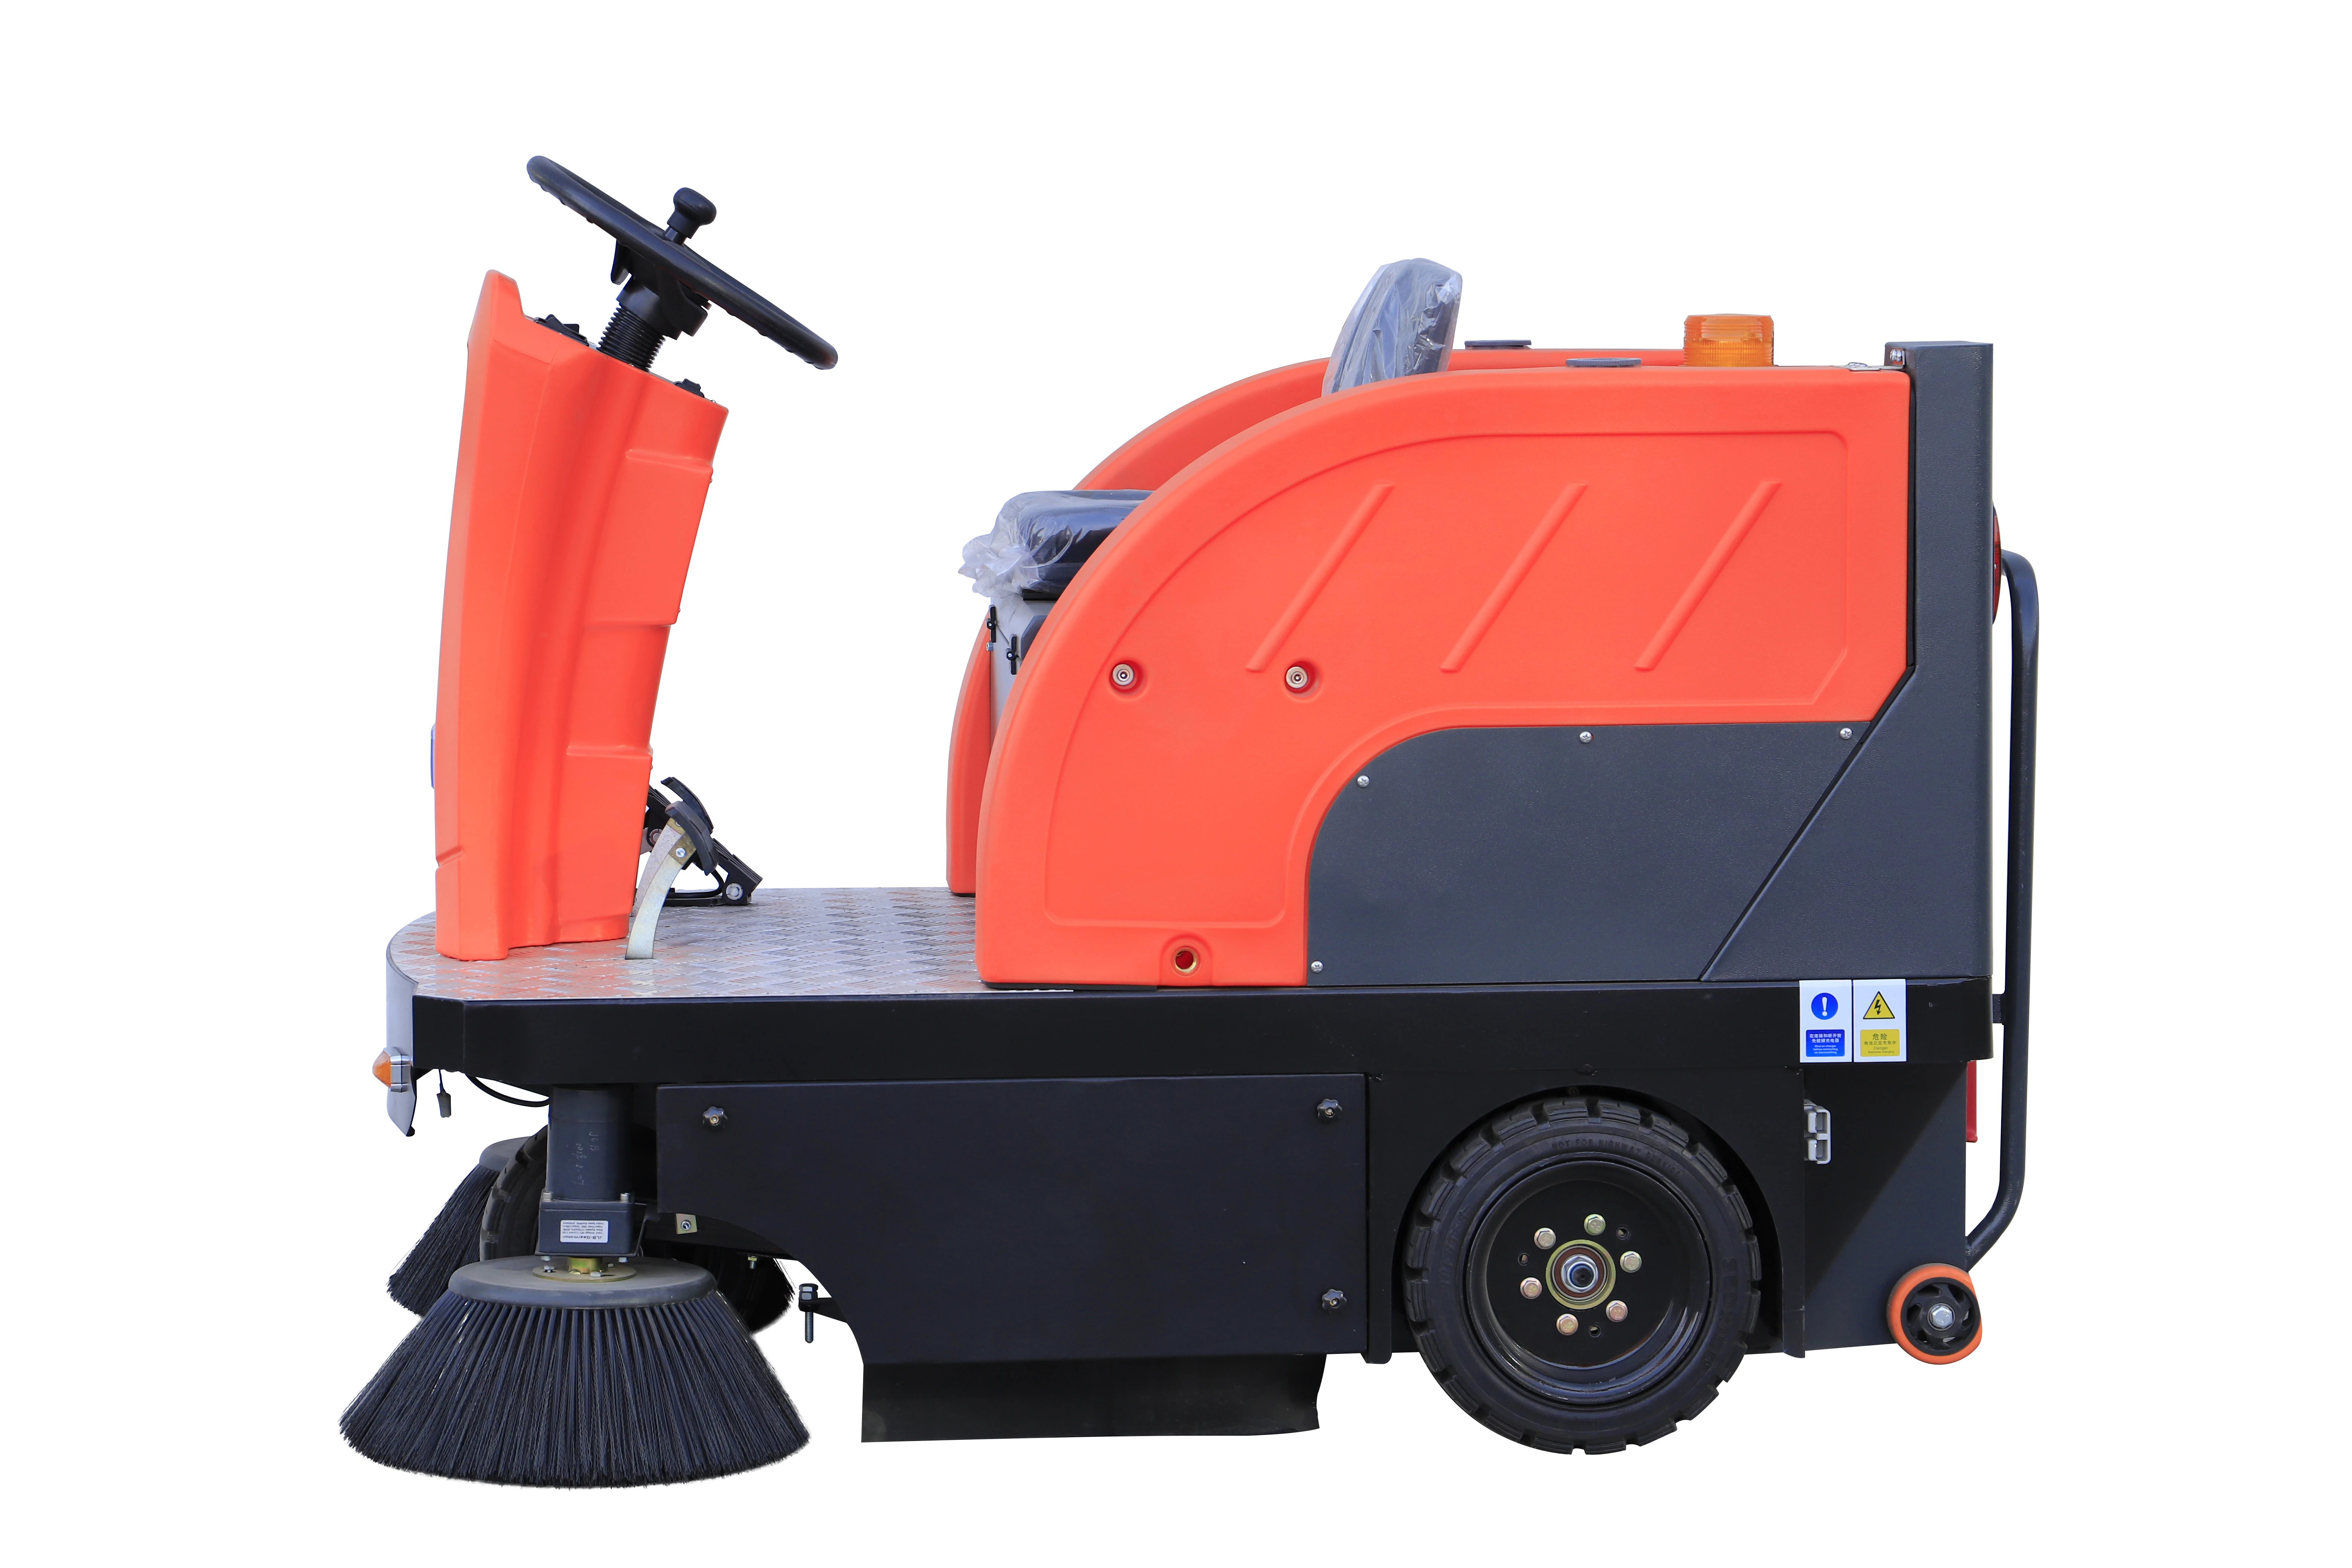 DK-G60 Sweeper Scrubber Equipment Auto Automatic Floor Cleaning Machine Black White Blue Motor